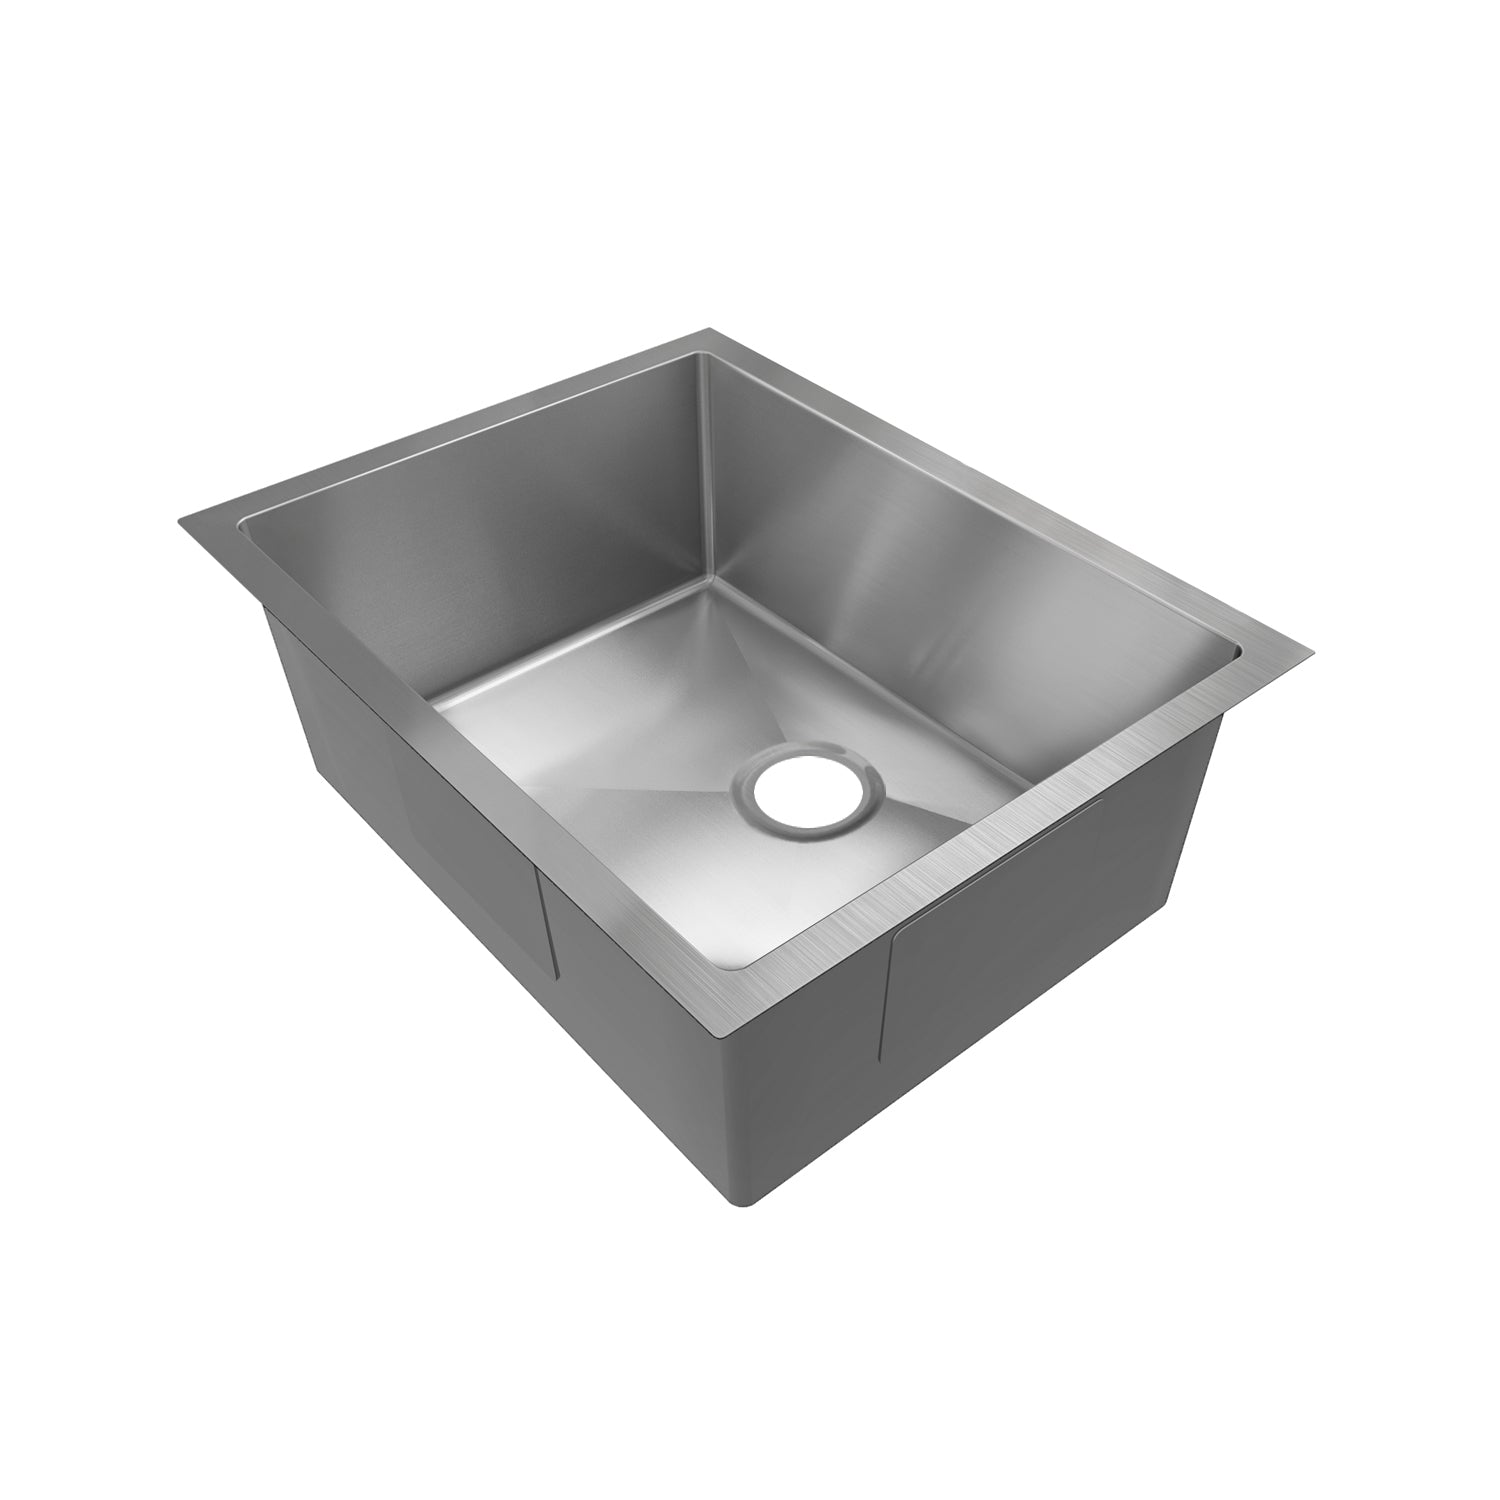 Sinber 23" x 18" x 12" Undermount Single Bowl Kitchen Sink with 18 Gauge 304 Stainless Steel Satin Finish HU2318S-S-12 (Sink Only)